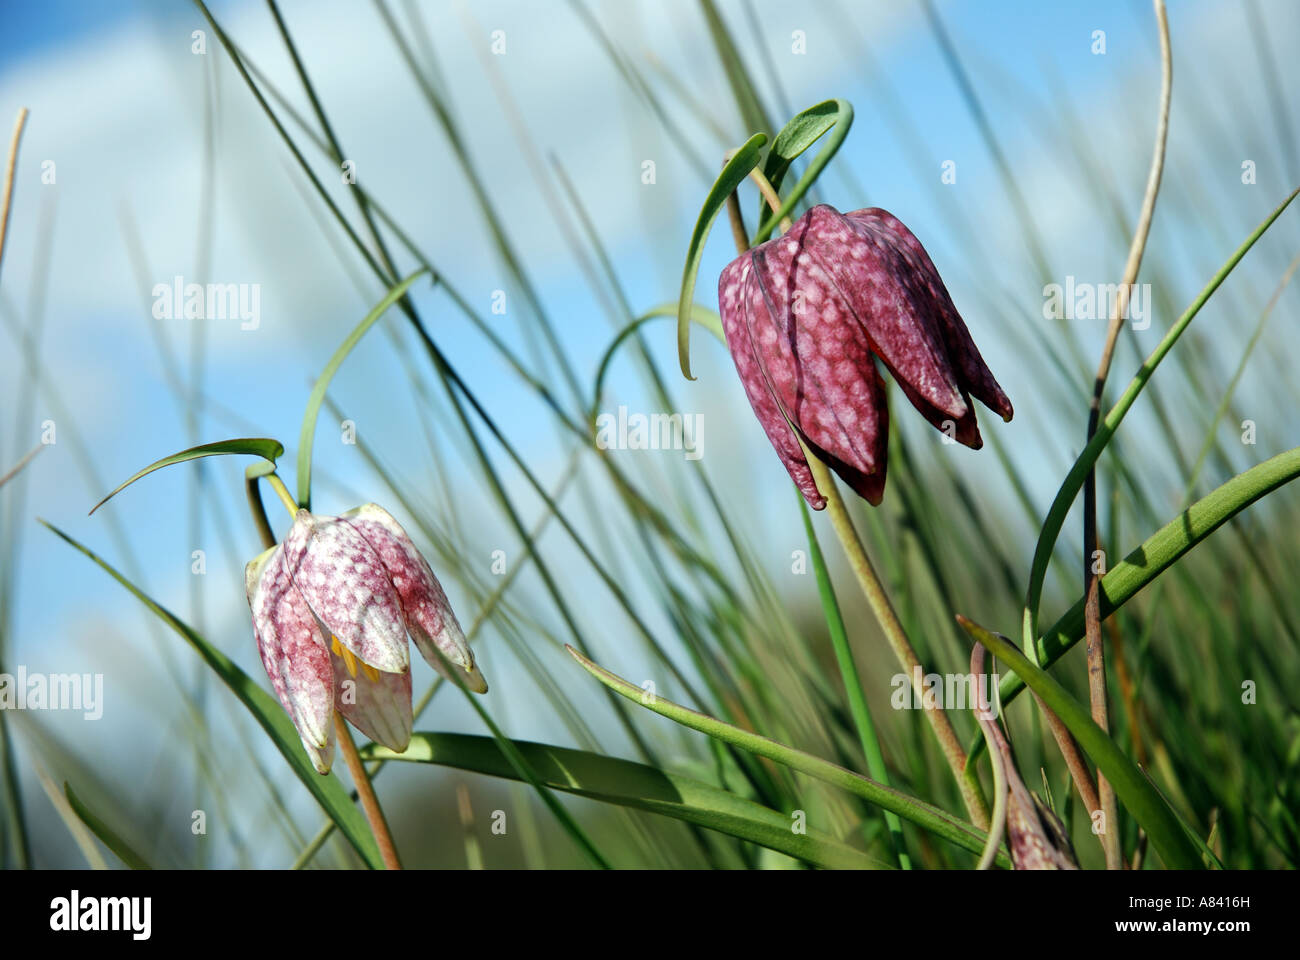 Fritillaries flowering in Iffley Meadows, Oxford, Oxfordshire, England, UK Stock Photo